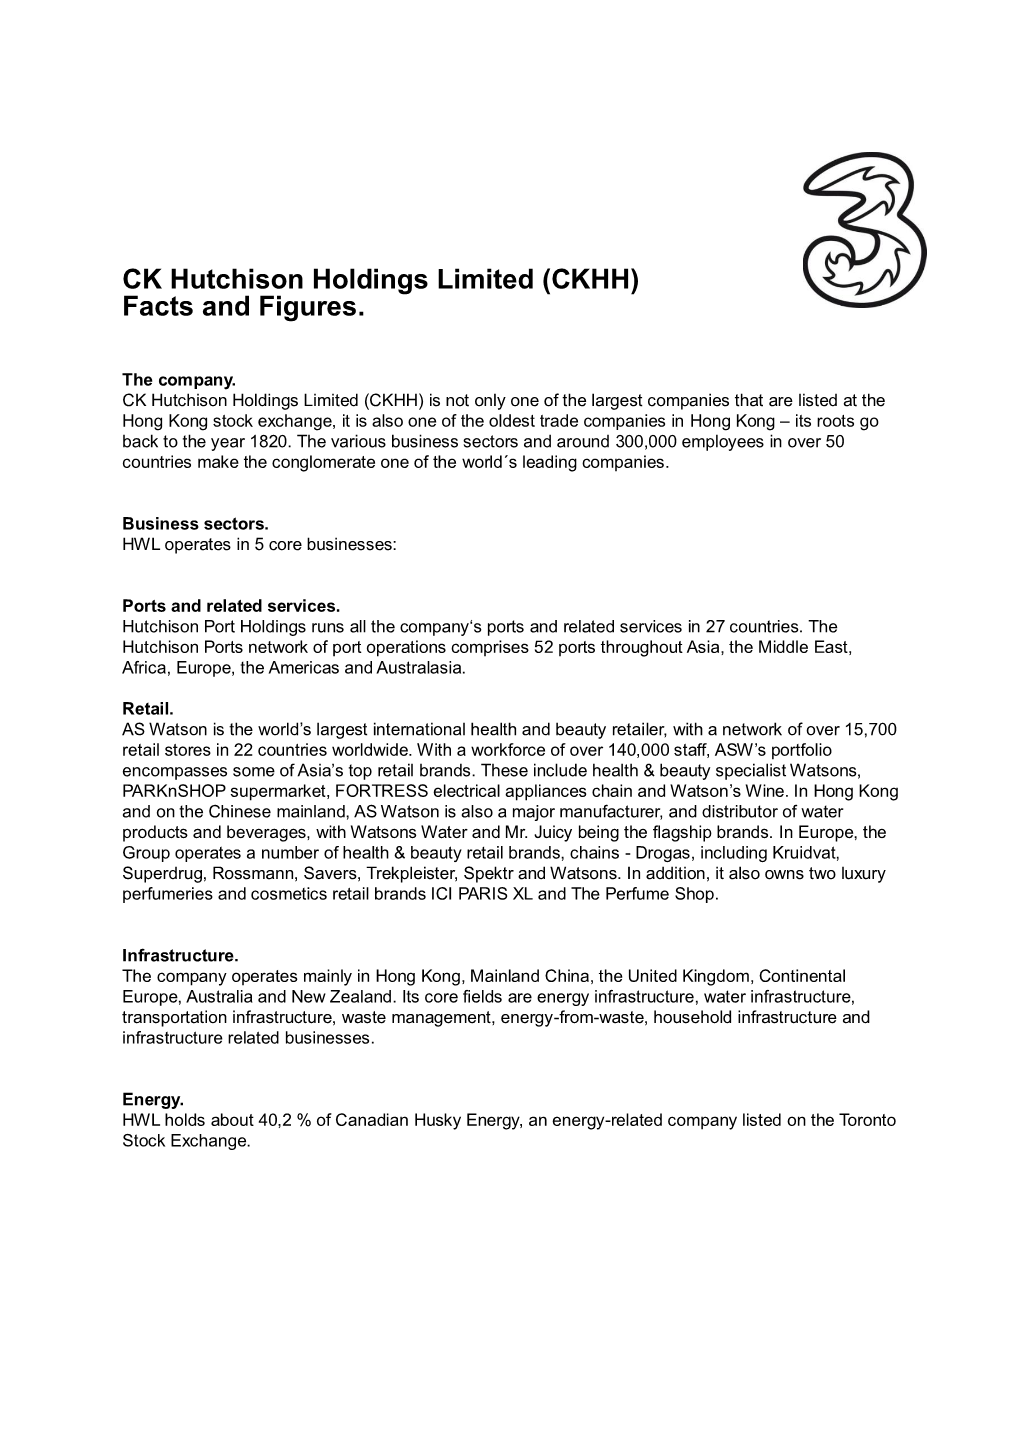 CK Hutchison Holdings Limited (CKHH) Facts and Figures